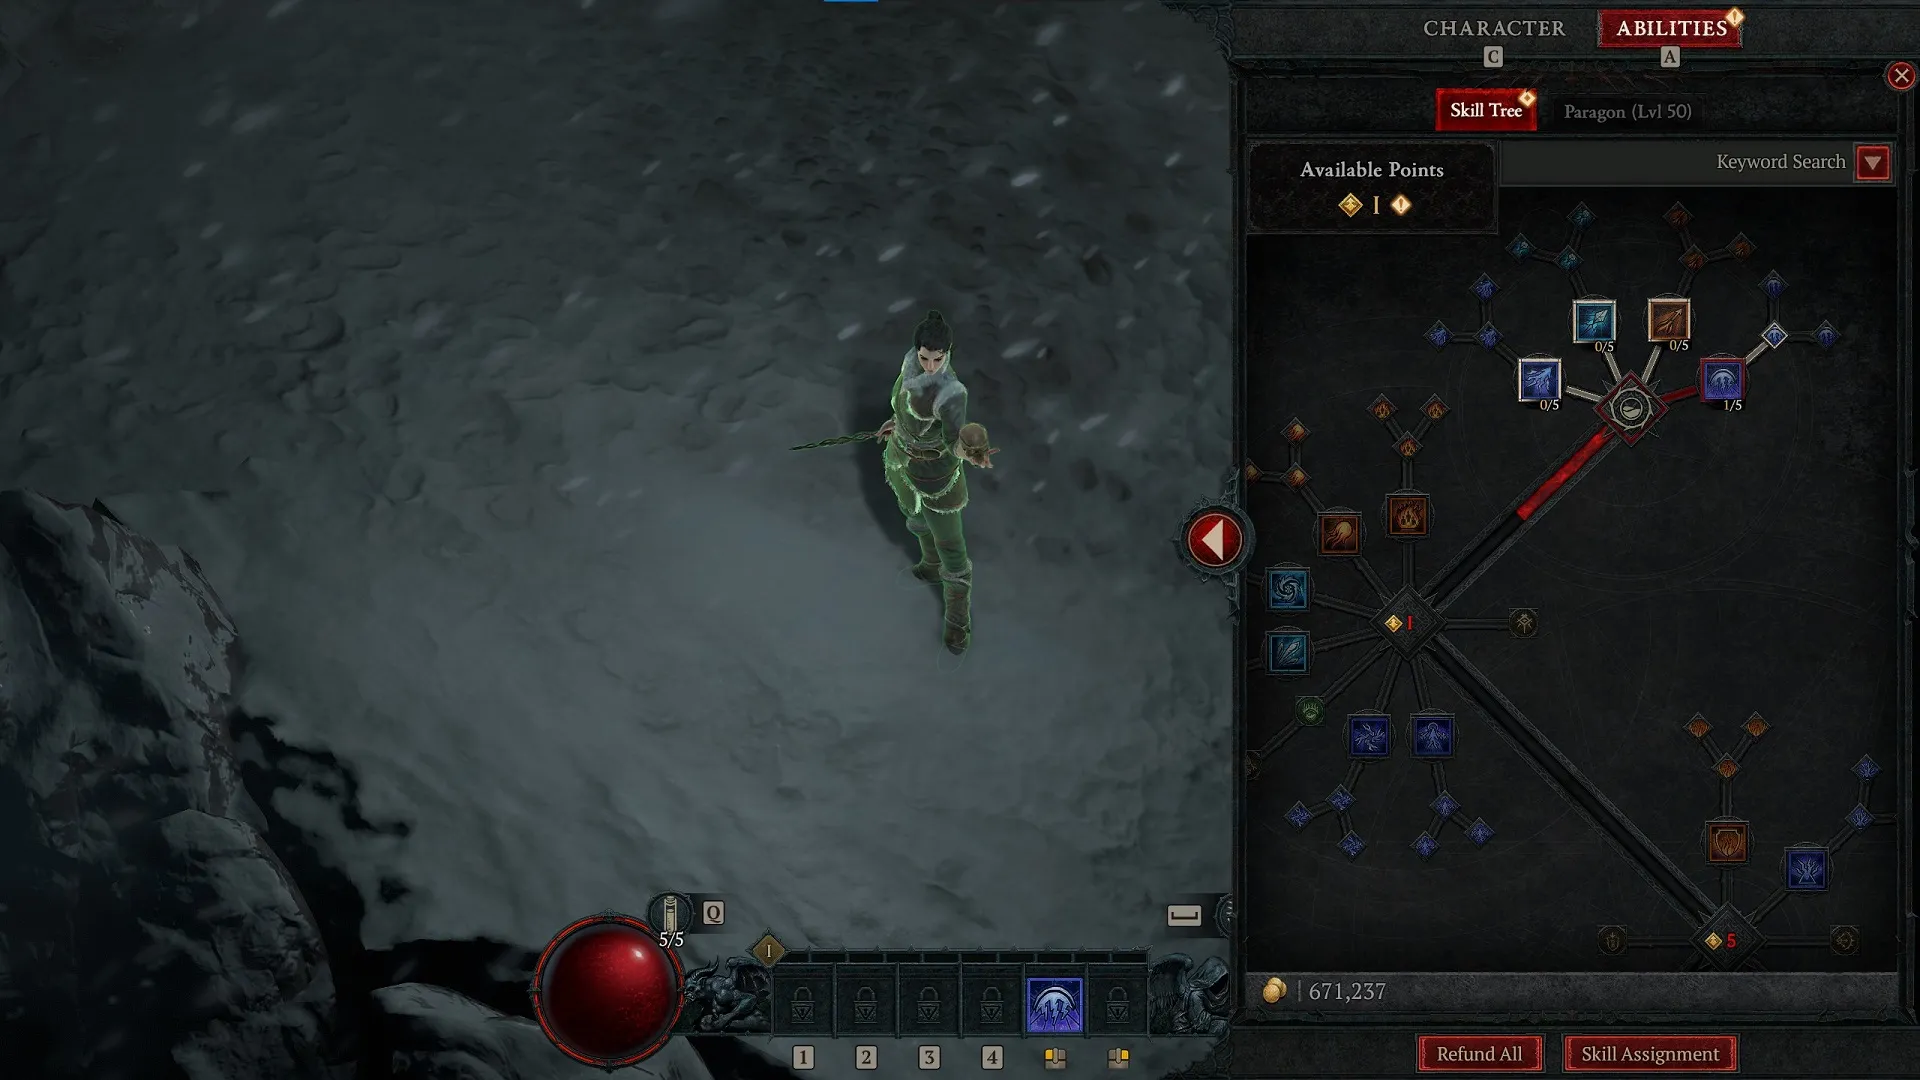 An image of the Sorcerer's skill tree in Diablo 4.